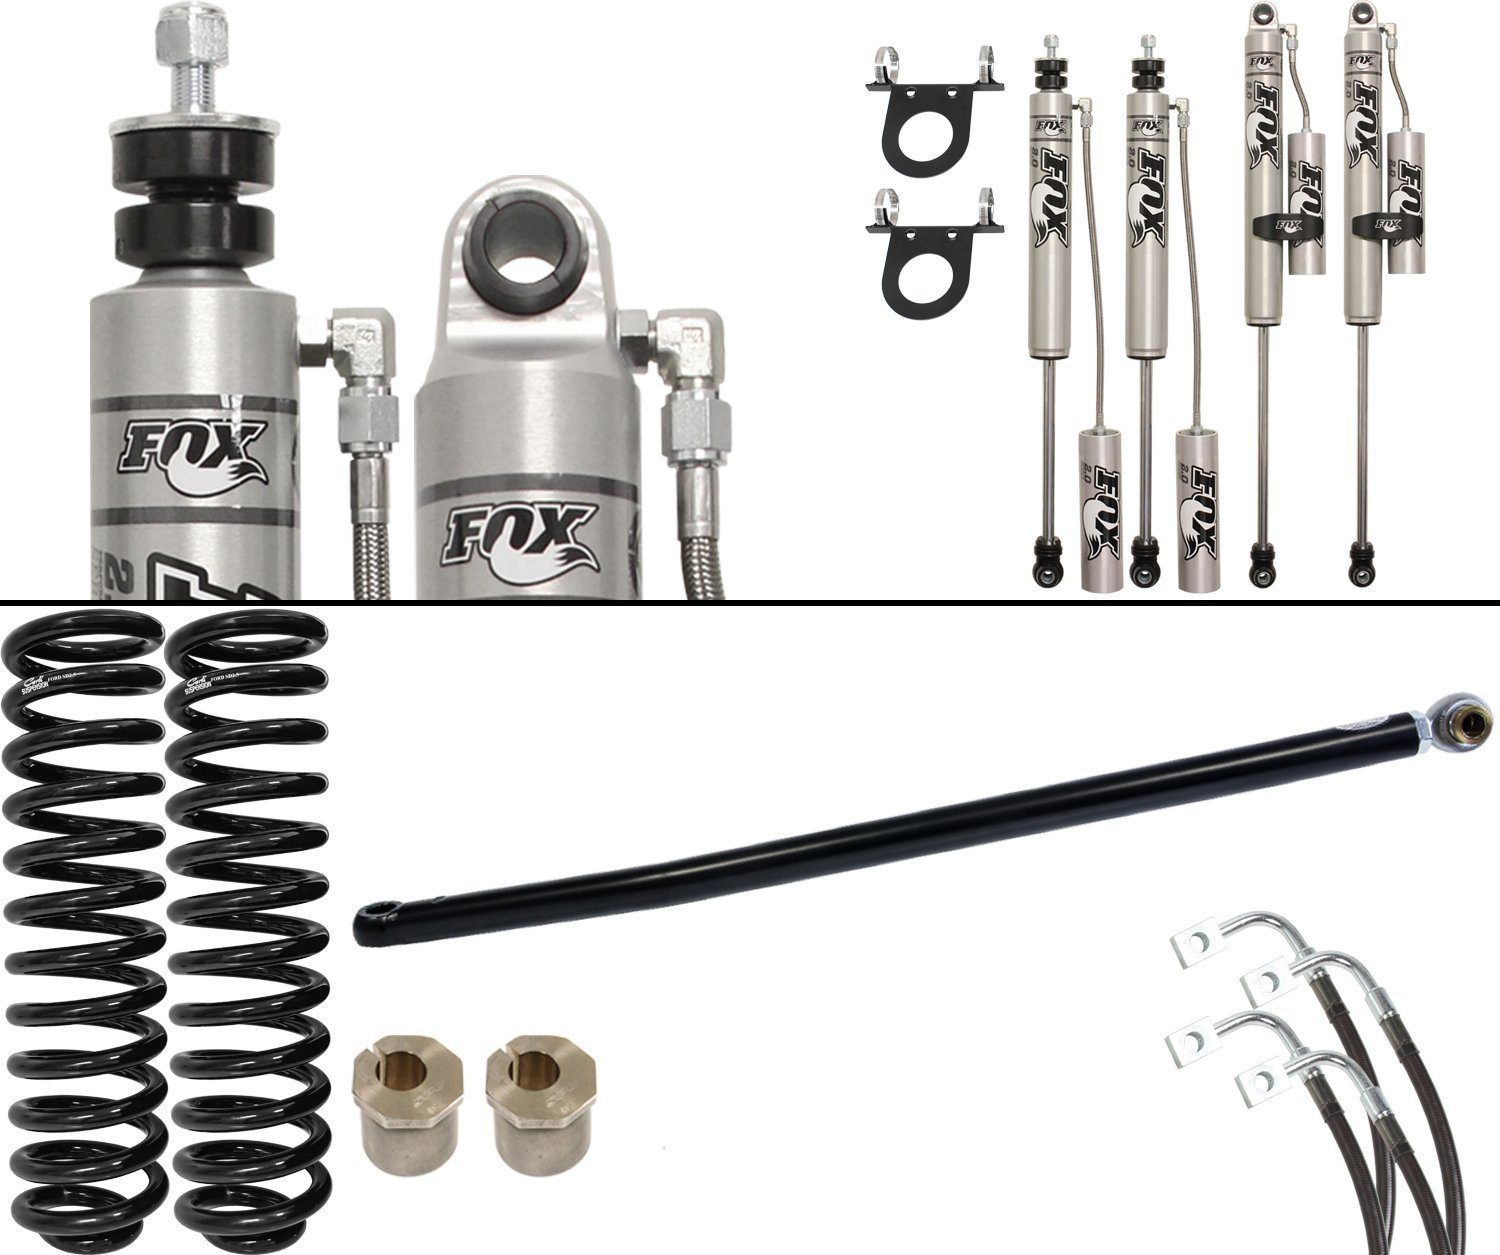 '11-16 Ford F250/350 2.0 Backcountry System-2.5" Lift Suspension Carli Suspension parts